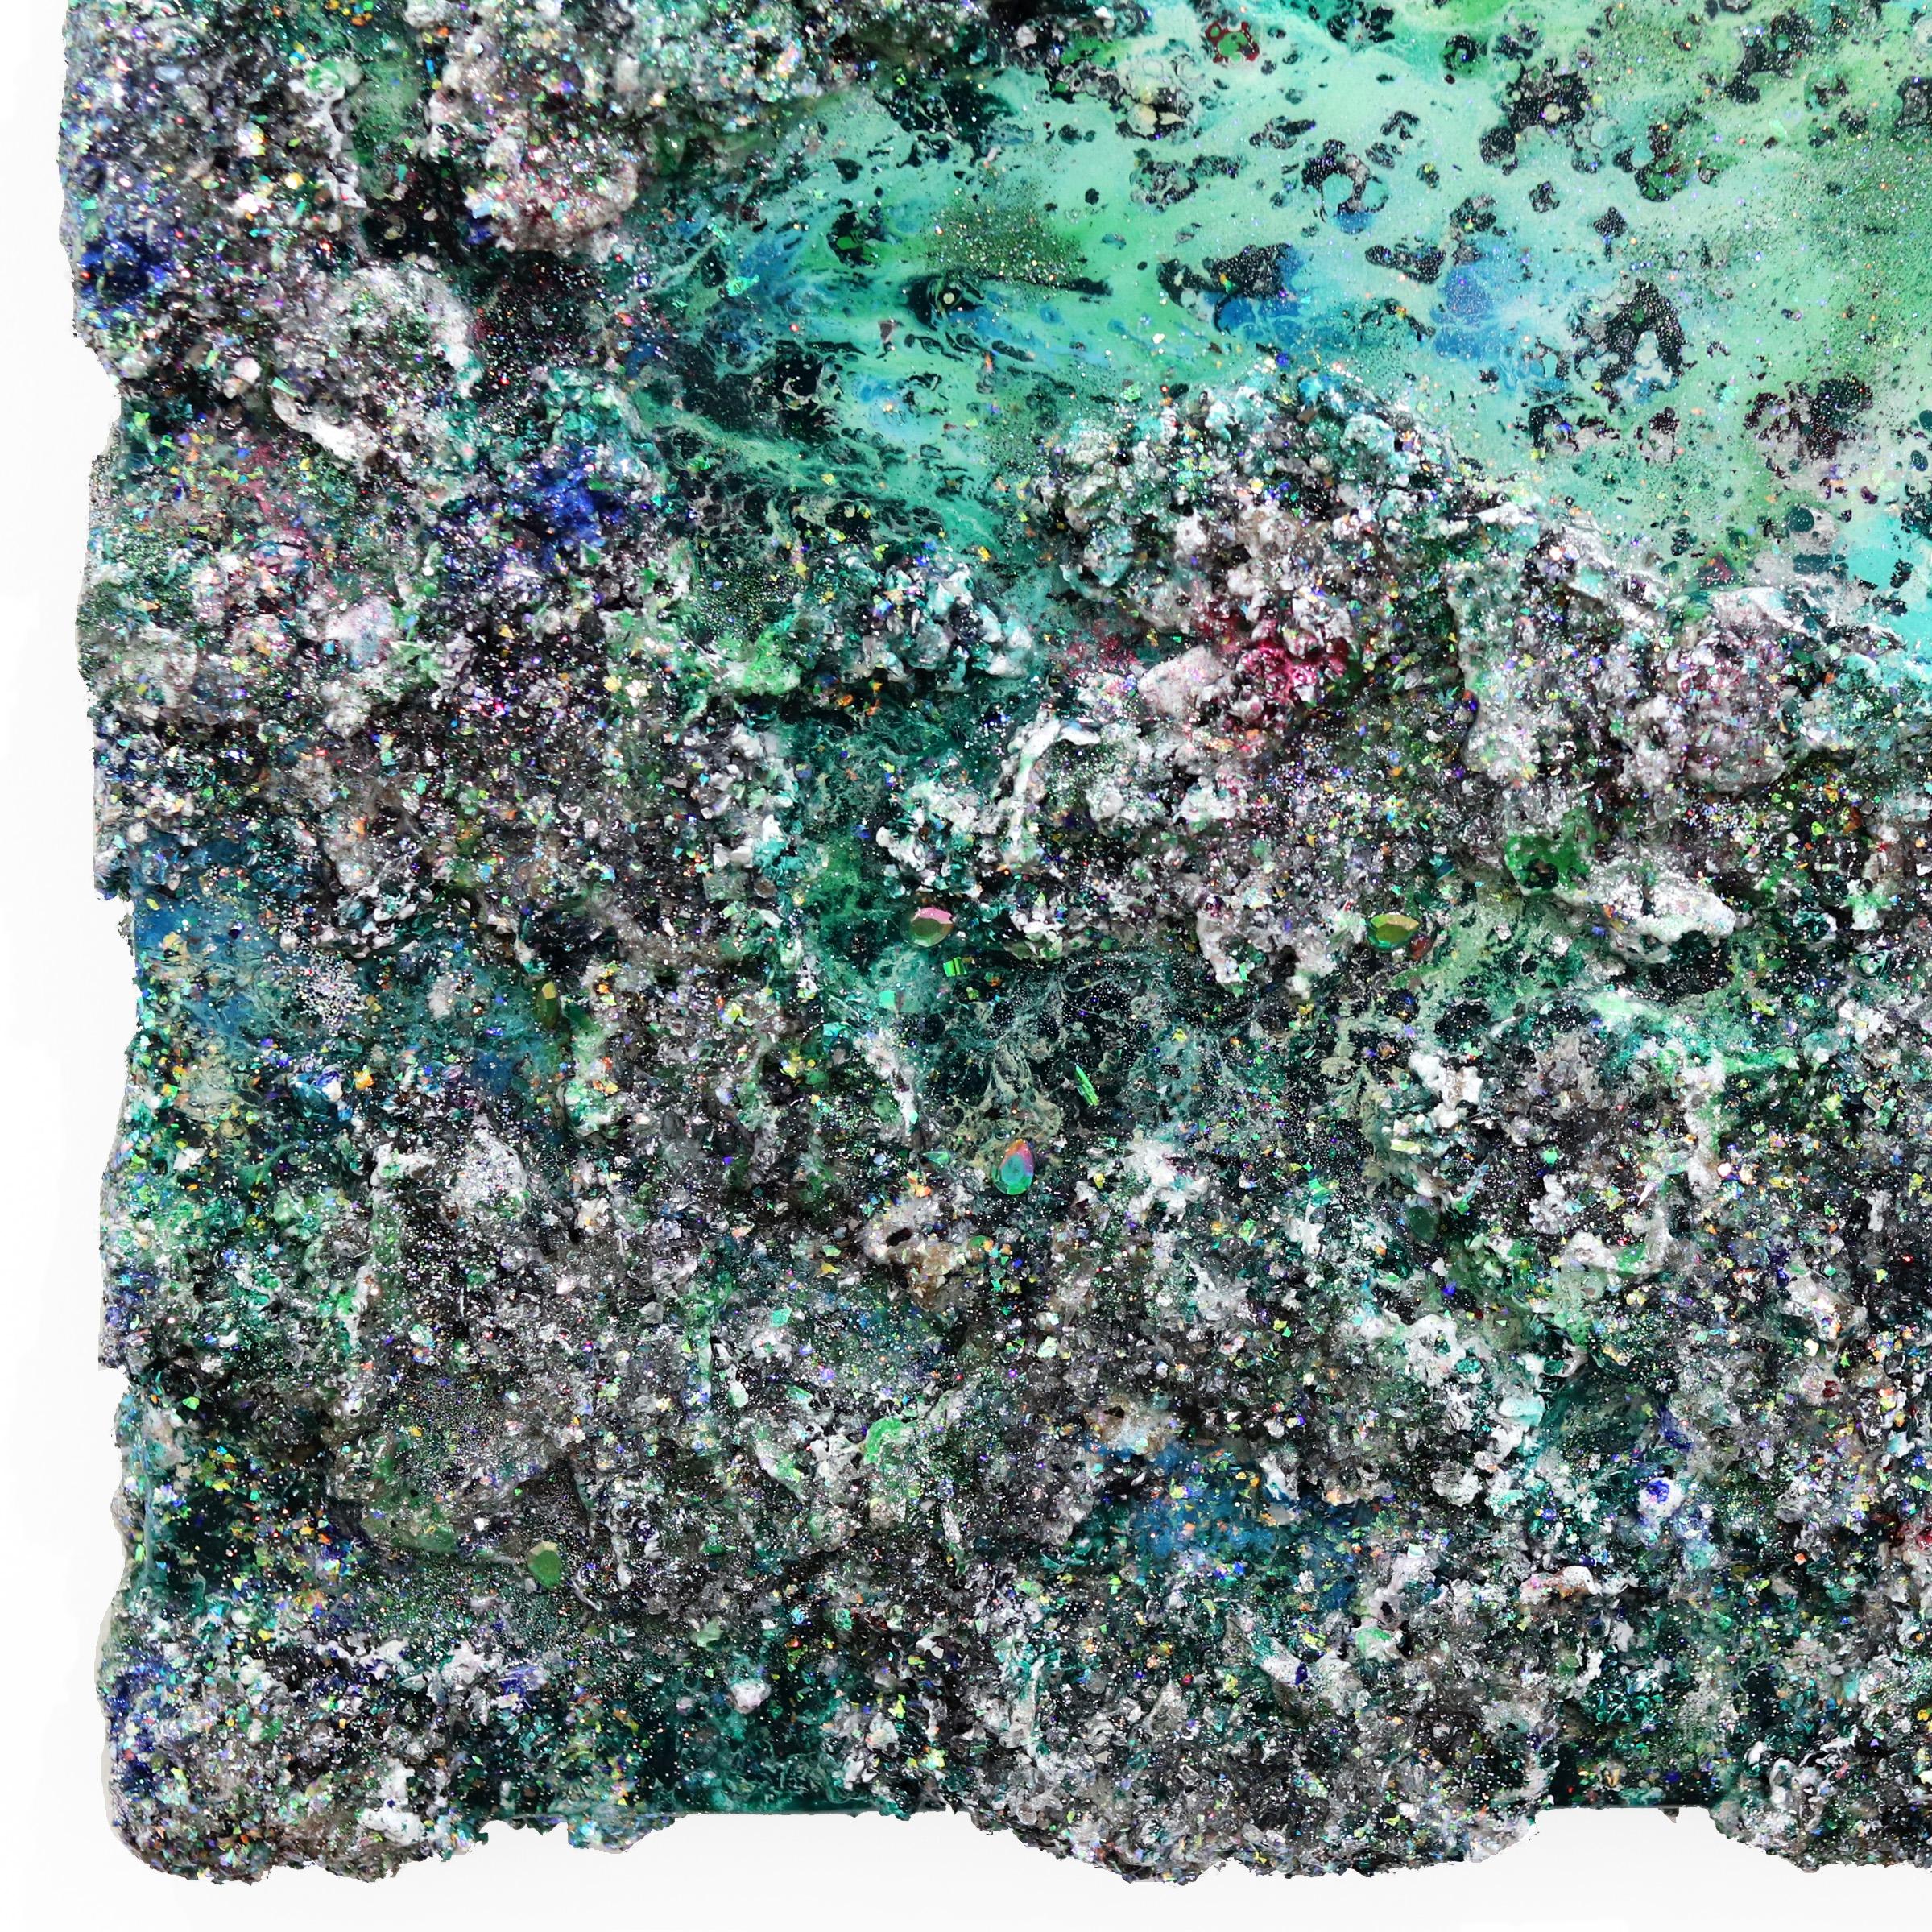 The World VI-II - Large Sculptural Green Oil, Mixed Media, and Resin Painting For Sale 1